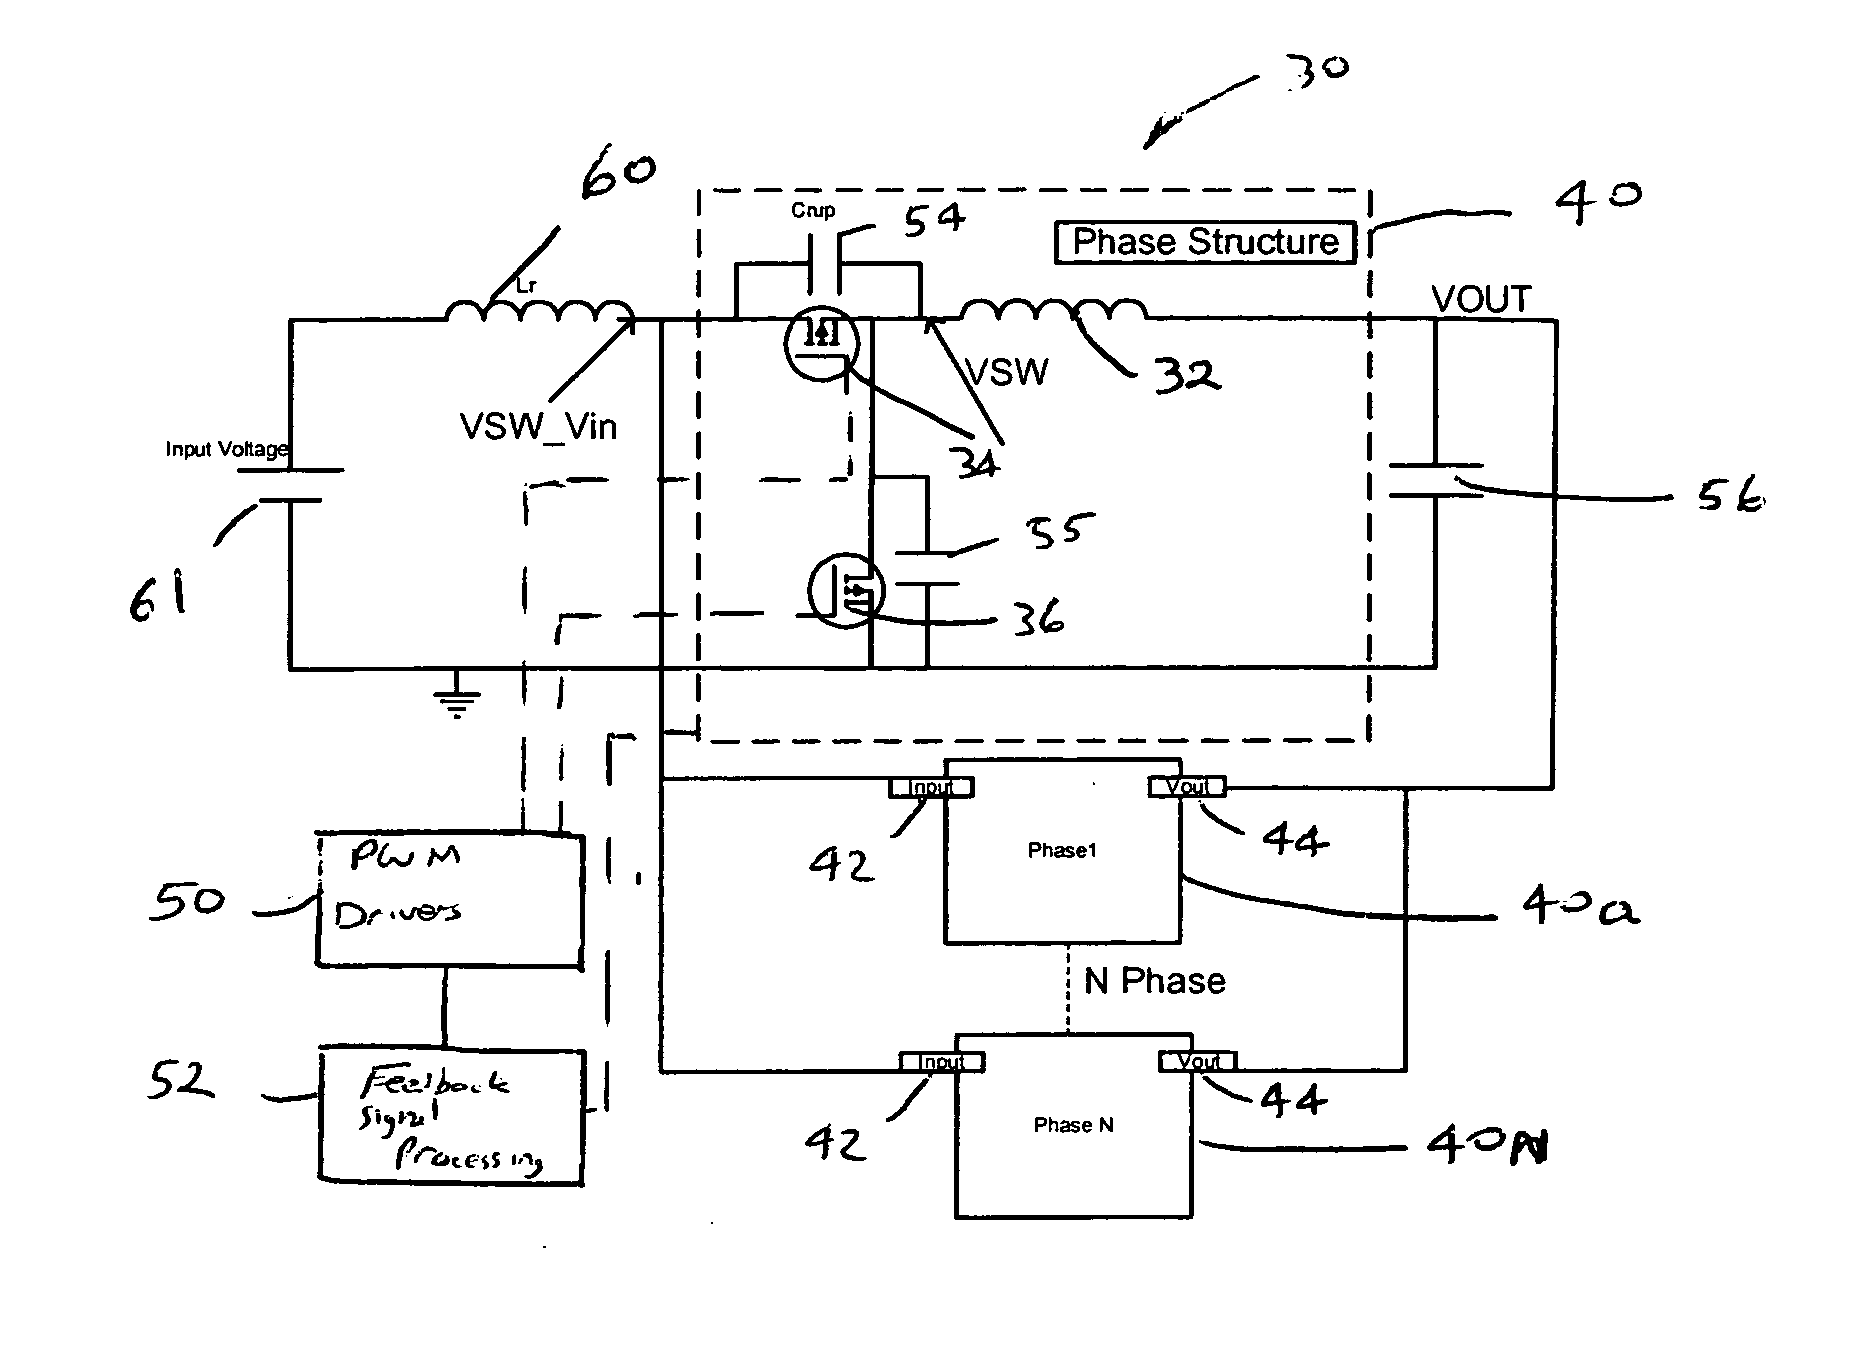 Multiphase converter with zero voltage switching